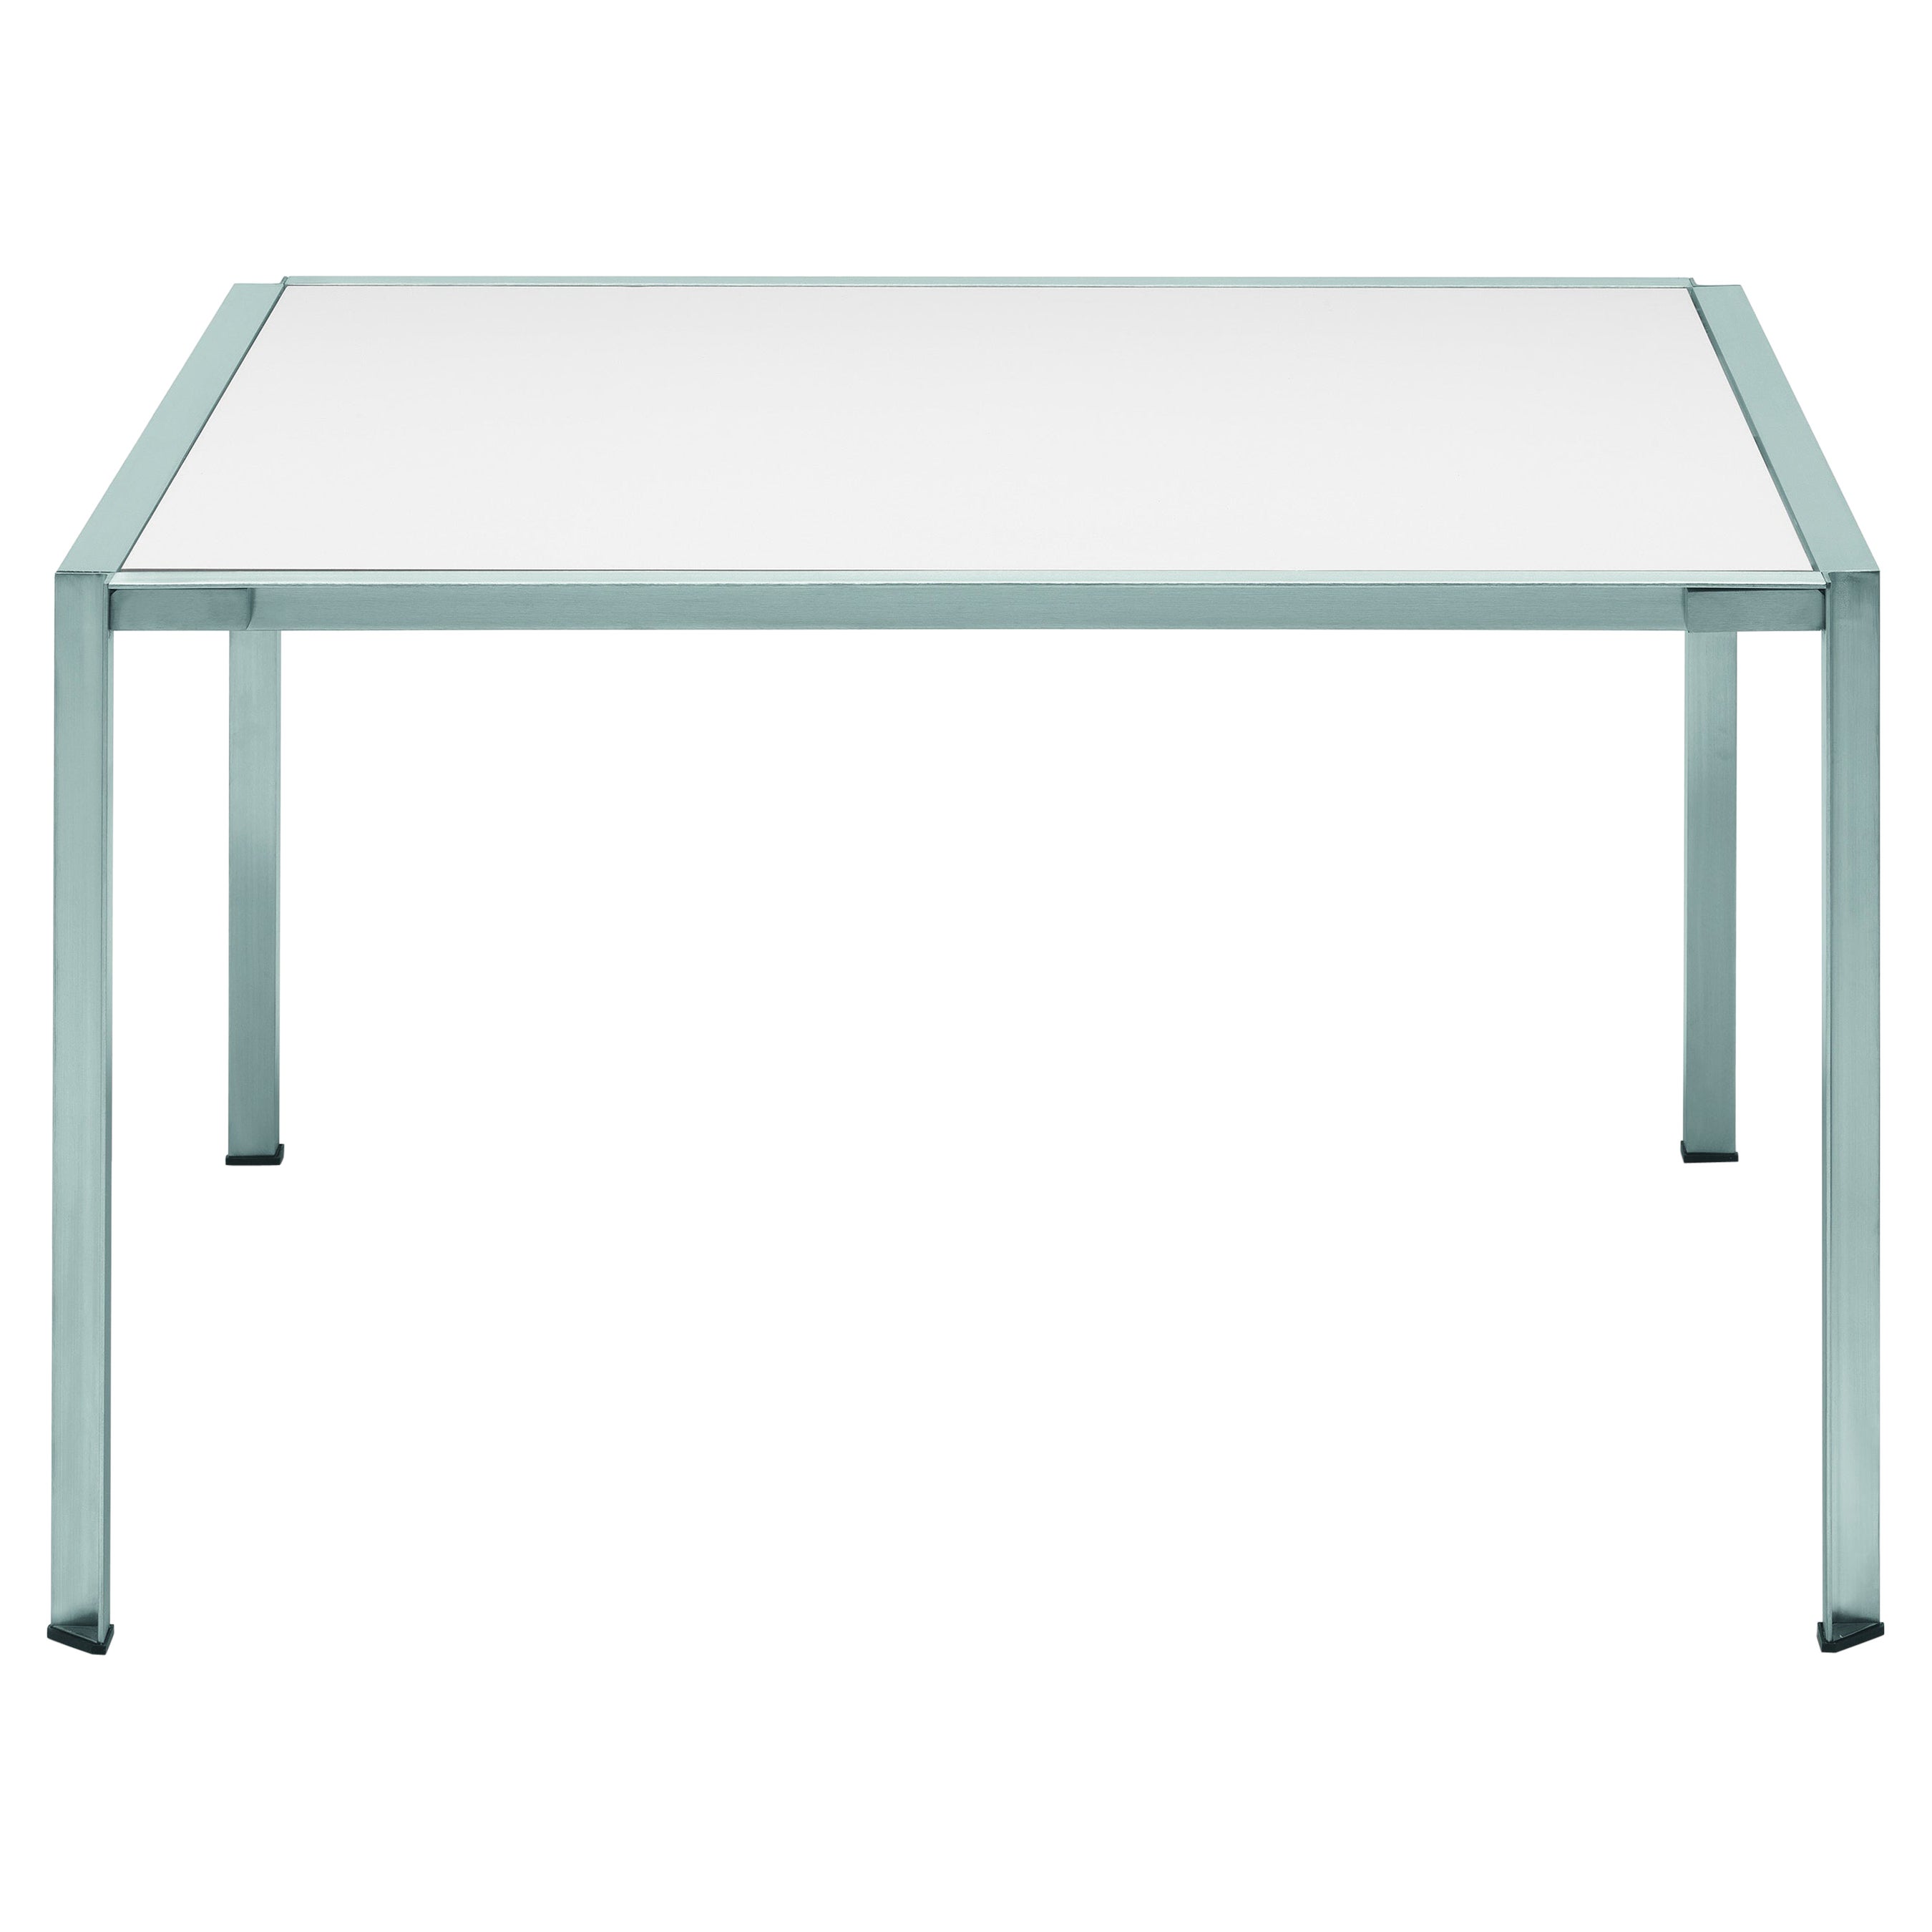 Alias 223_O Green Table with Brushed Stainless Steel Frame and Dekton Top  For Sale